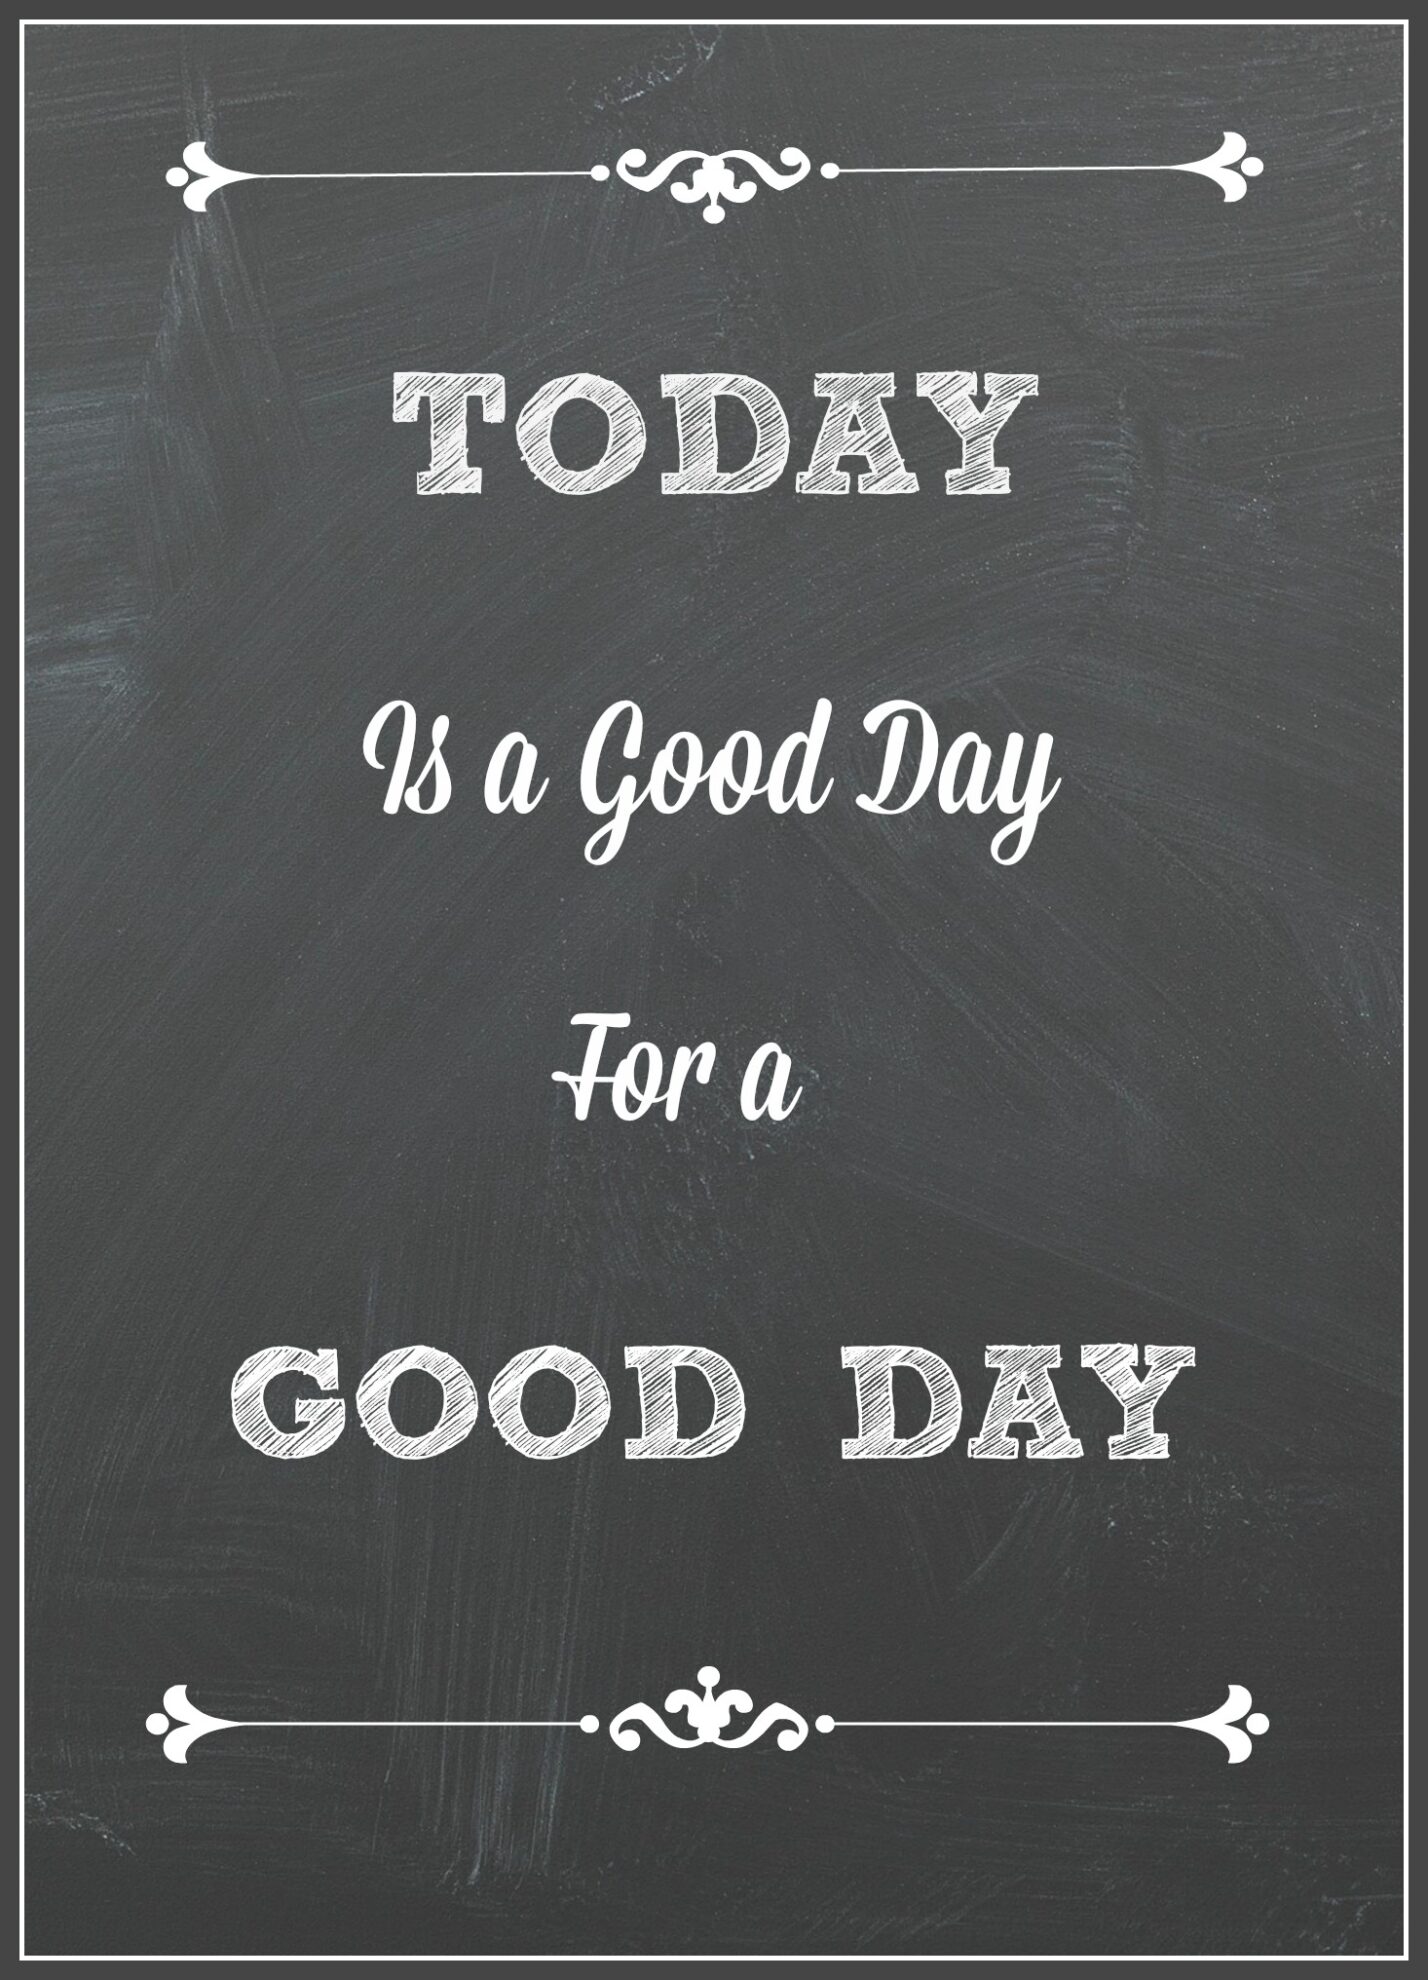 "Today is a good day for a good day" free printable